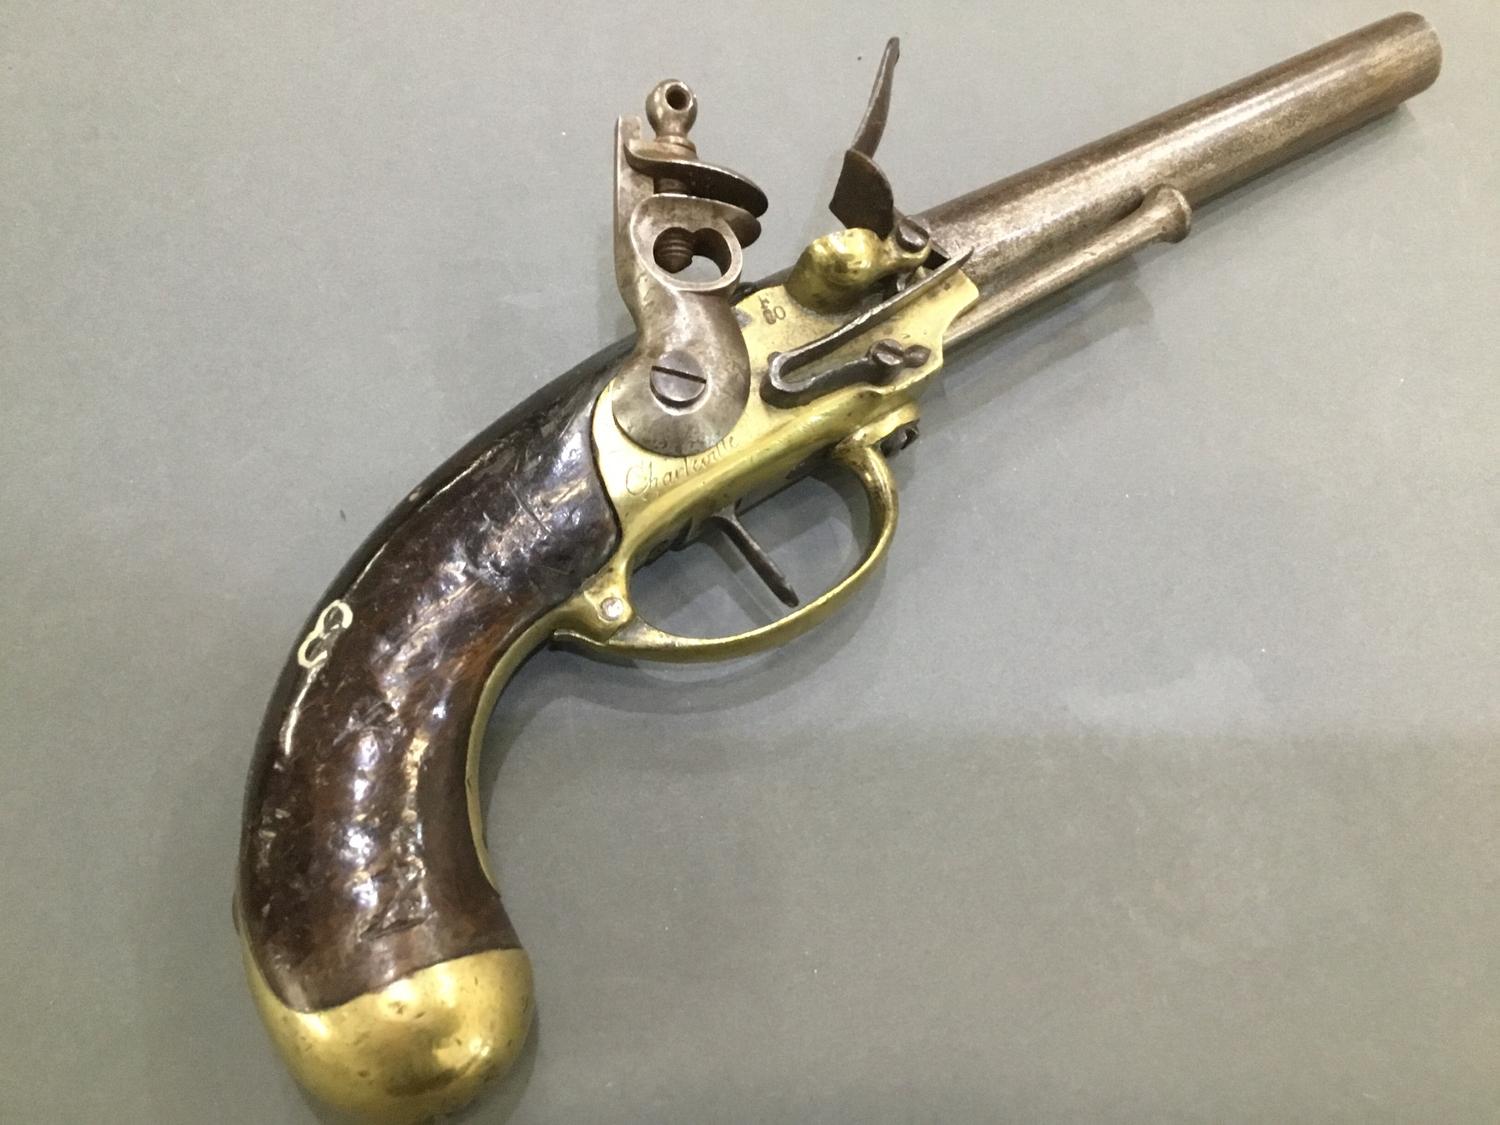 An early 19th Century French Flinlock pistol engraved 'Charleville' stamped 'F80'